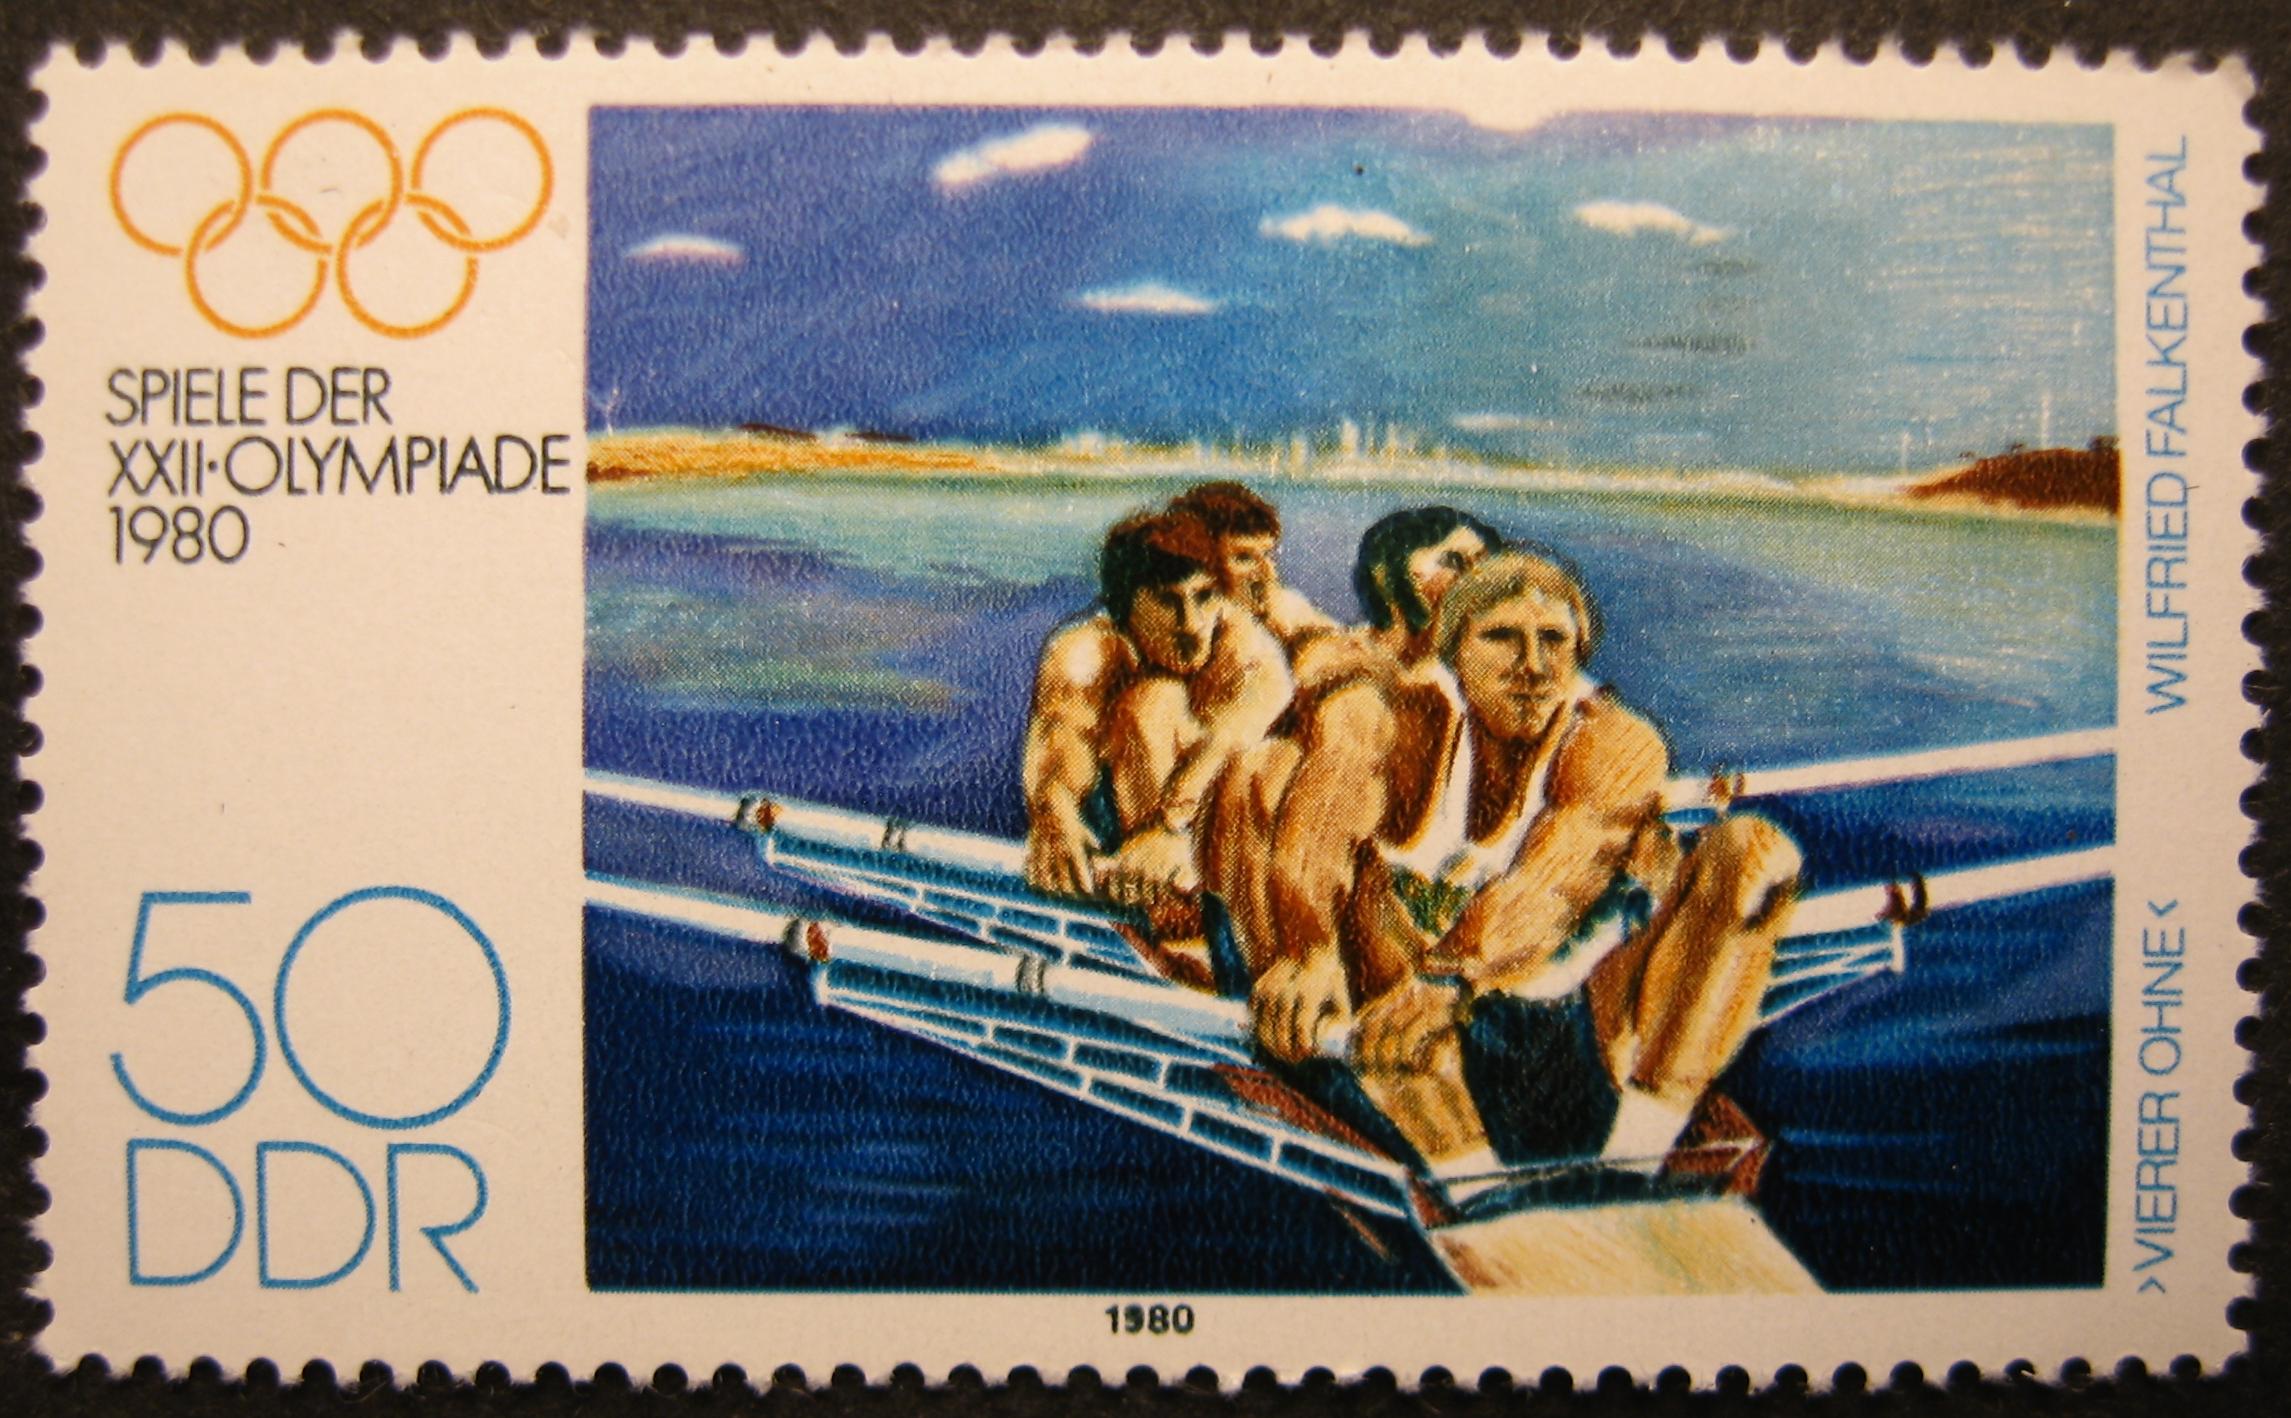 English: Rowing Olympic Games